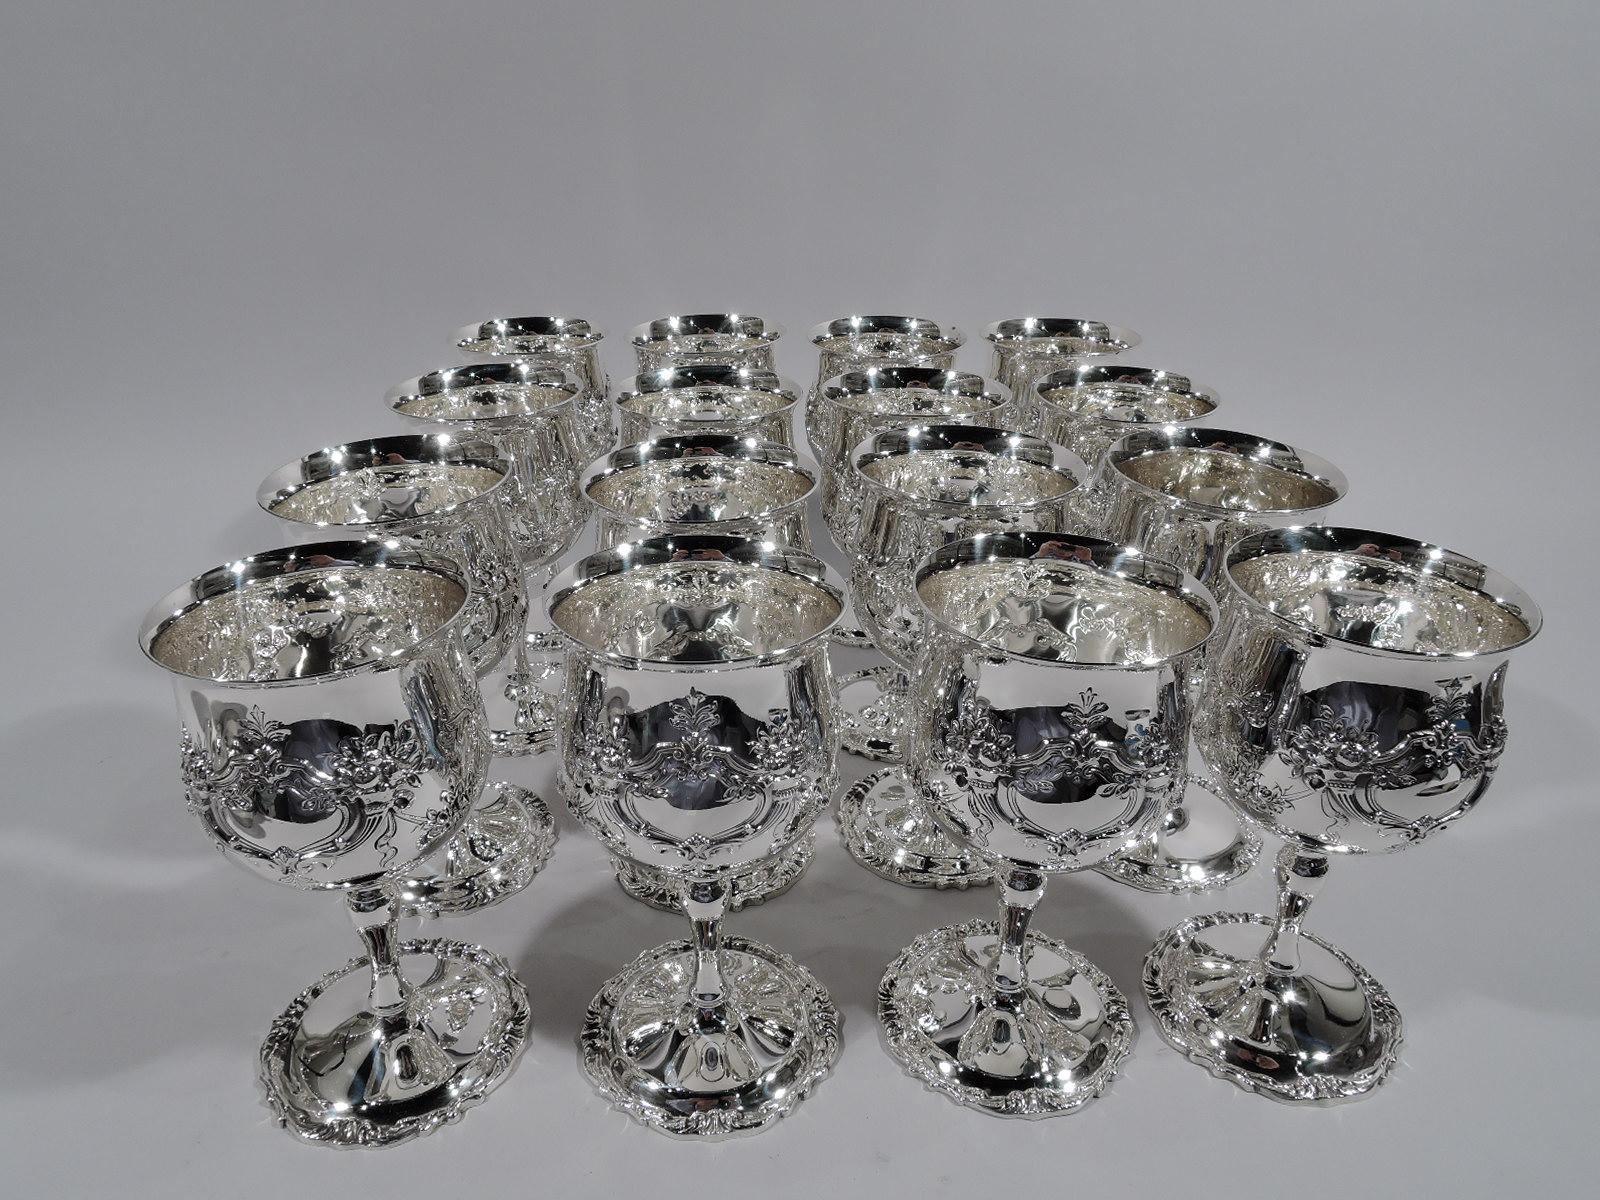 Set of 16 sterling silver goblets in Francis I pattern. Made by Reed & Barton in Taunton, Mass. Bowl has flared rim and rests on baluster stem mounted to raised foot. Strapwork and cornucopia cartouches (vacant) joined by floral garlands. Scrolls